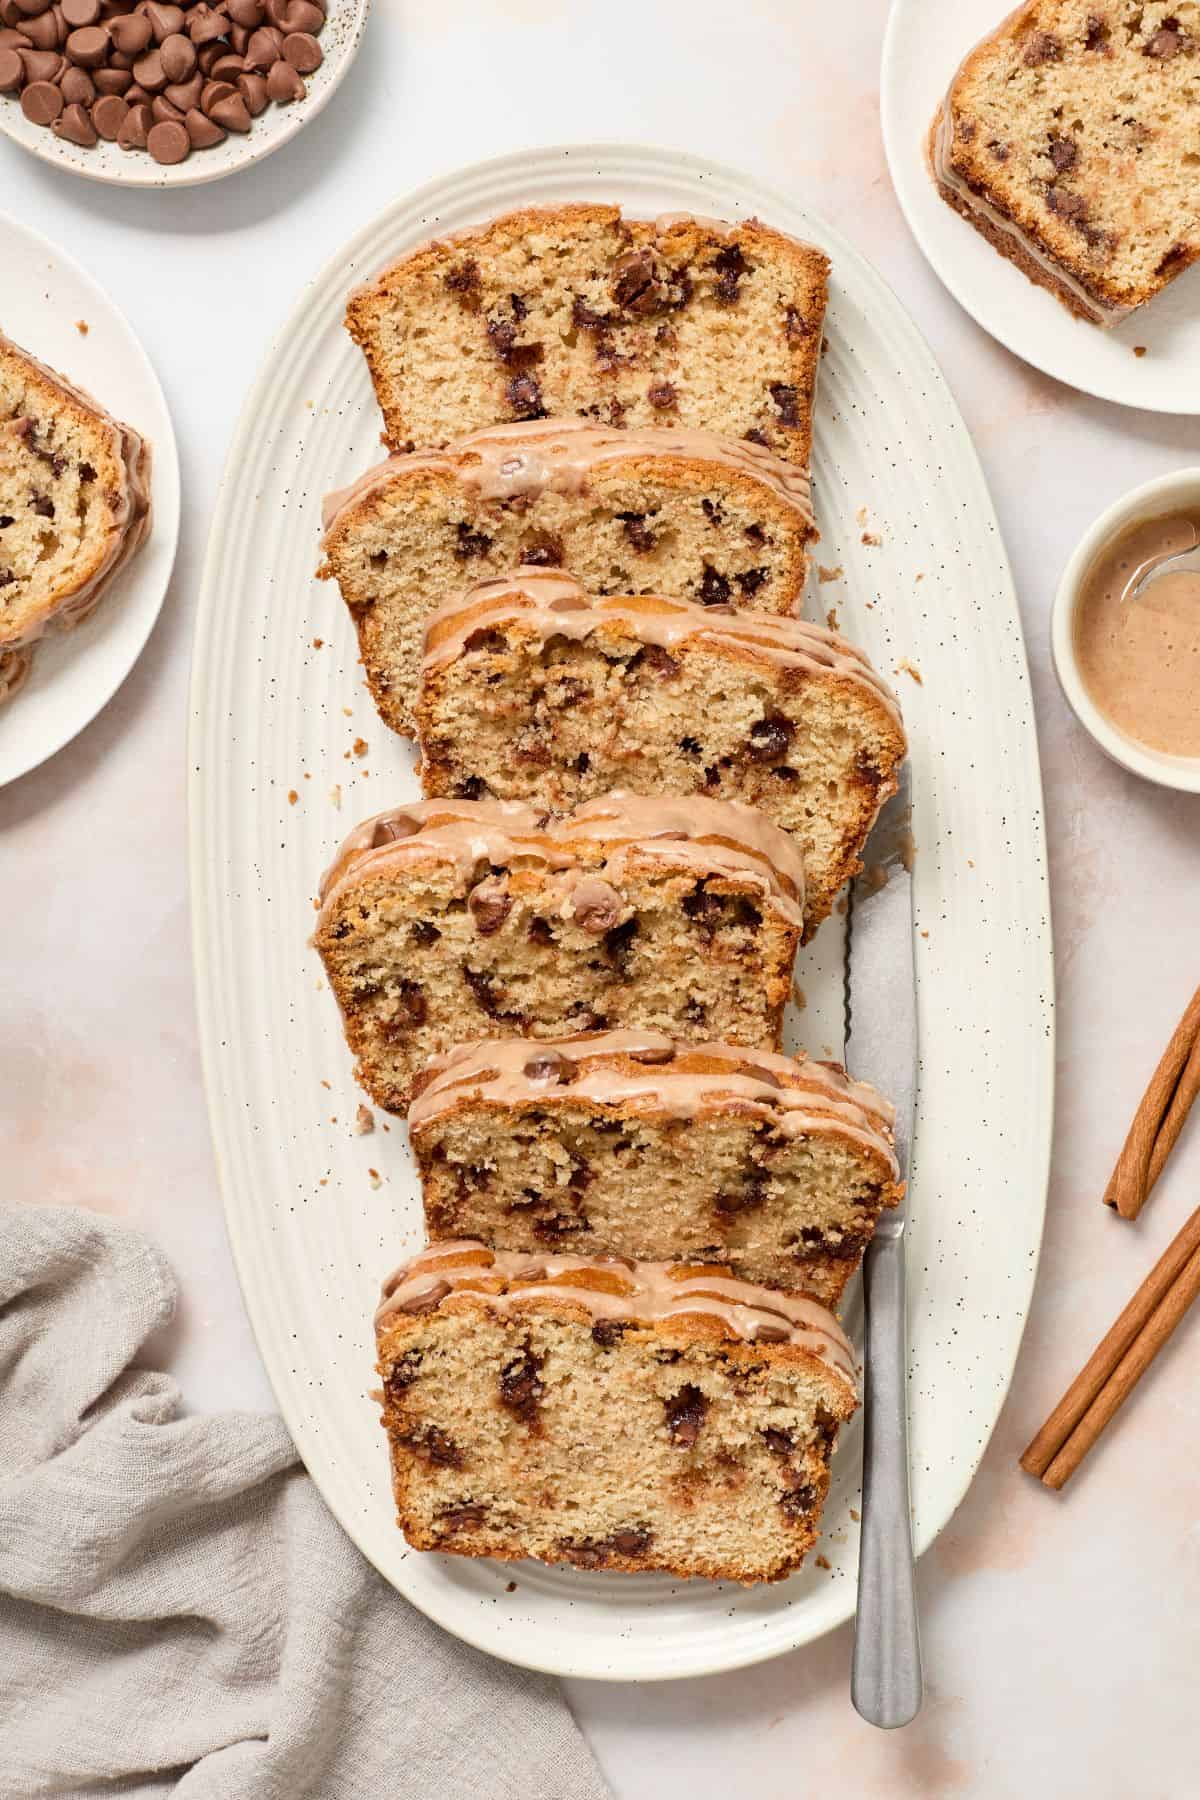 Slices of Cinnamon Chocolate Chip Loaf Cake arranged on a white oval platter, with a knife on the edge.